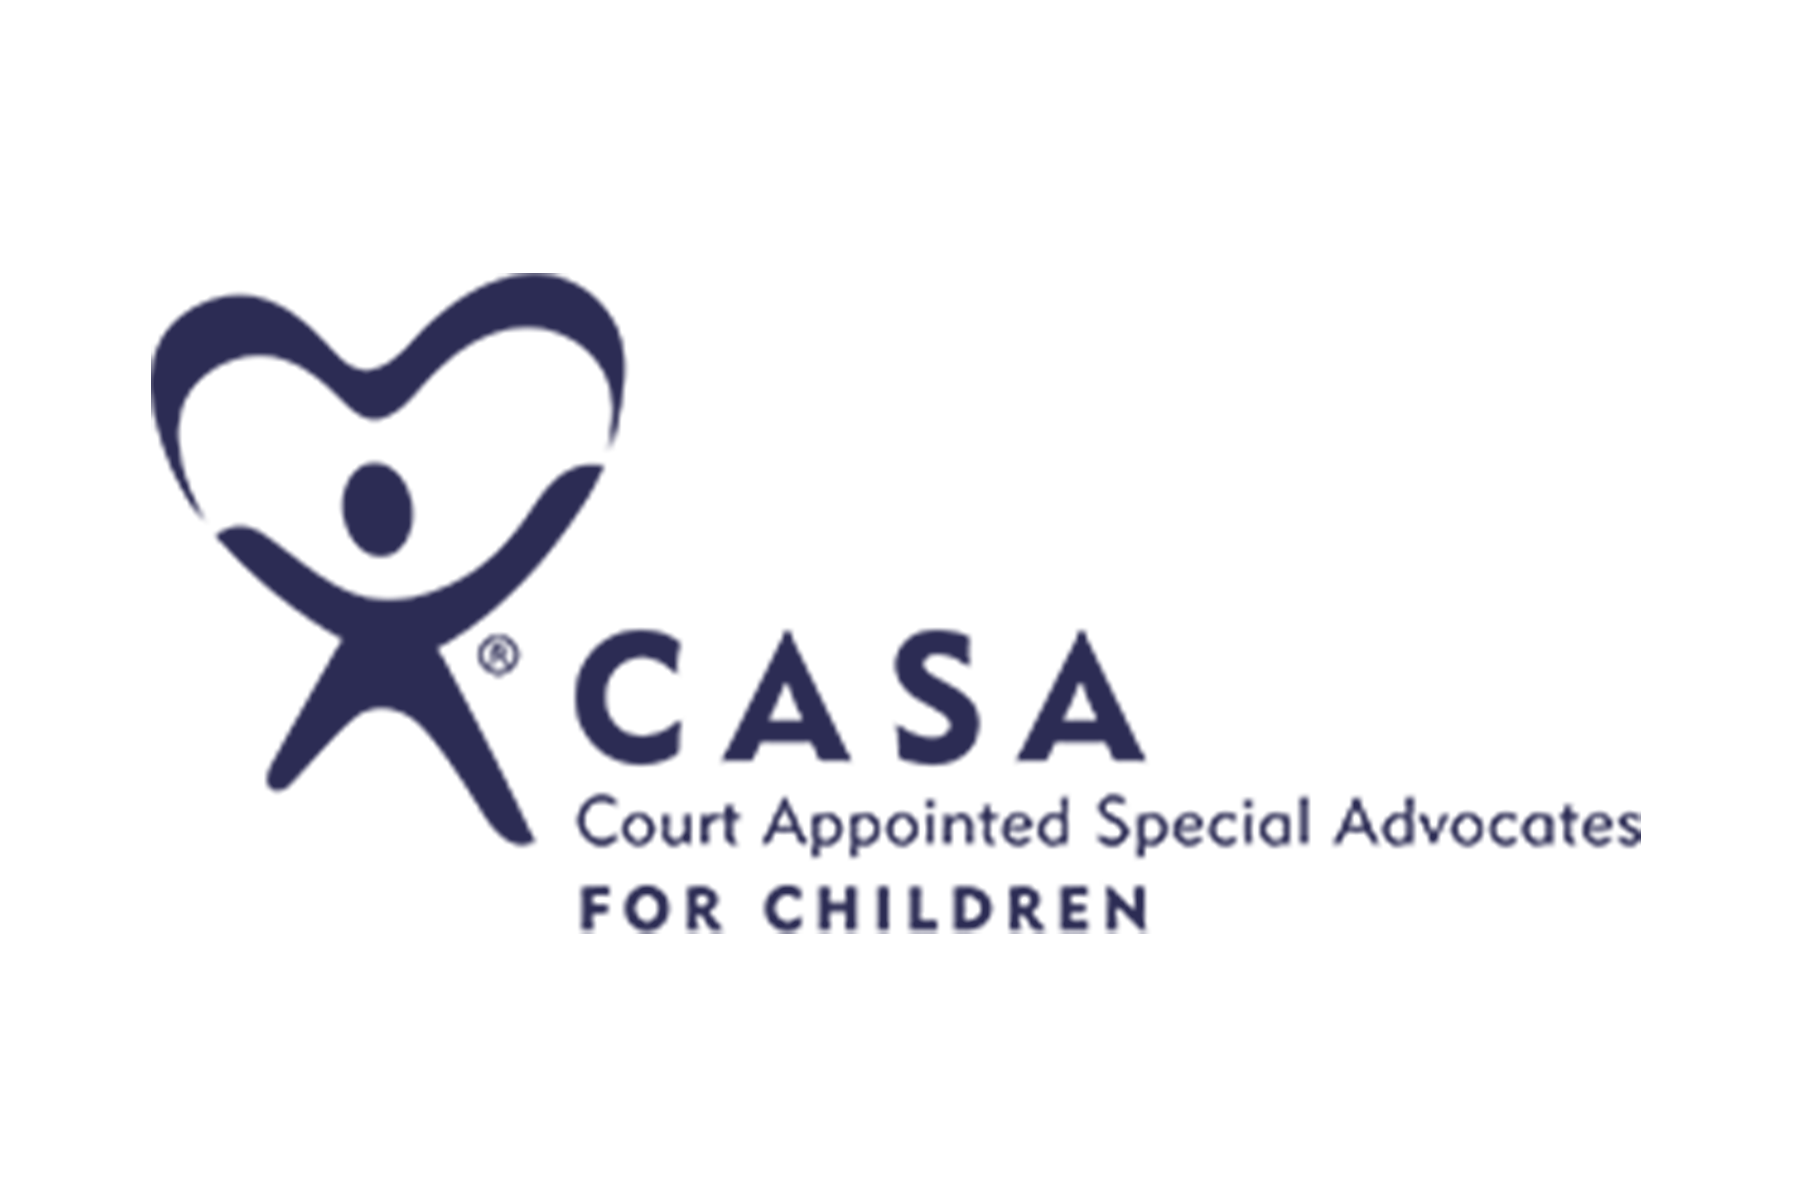 CASA Court Appointed Special Advocates for Children